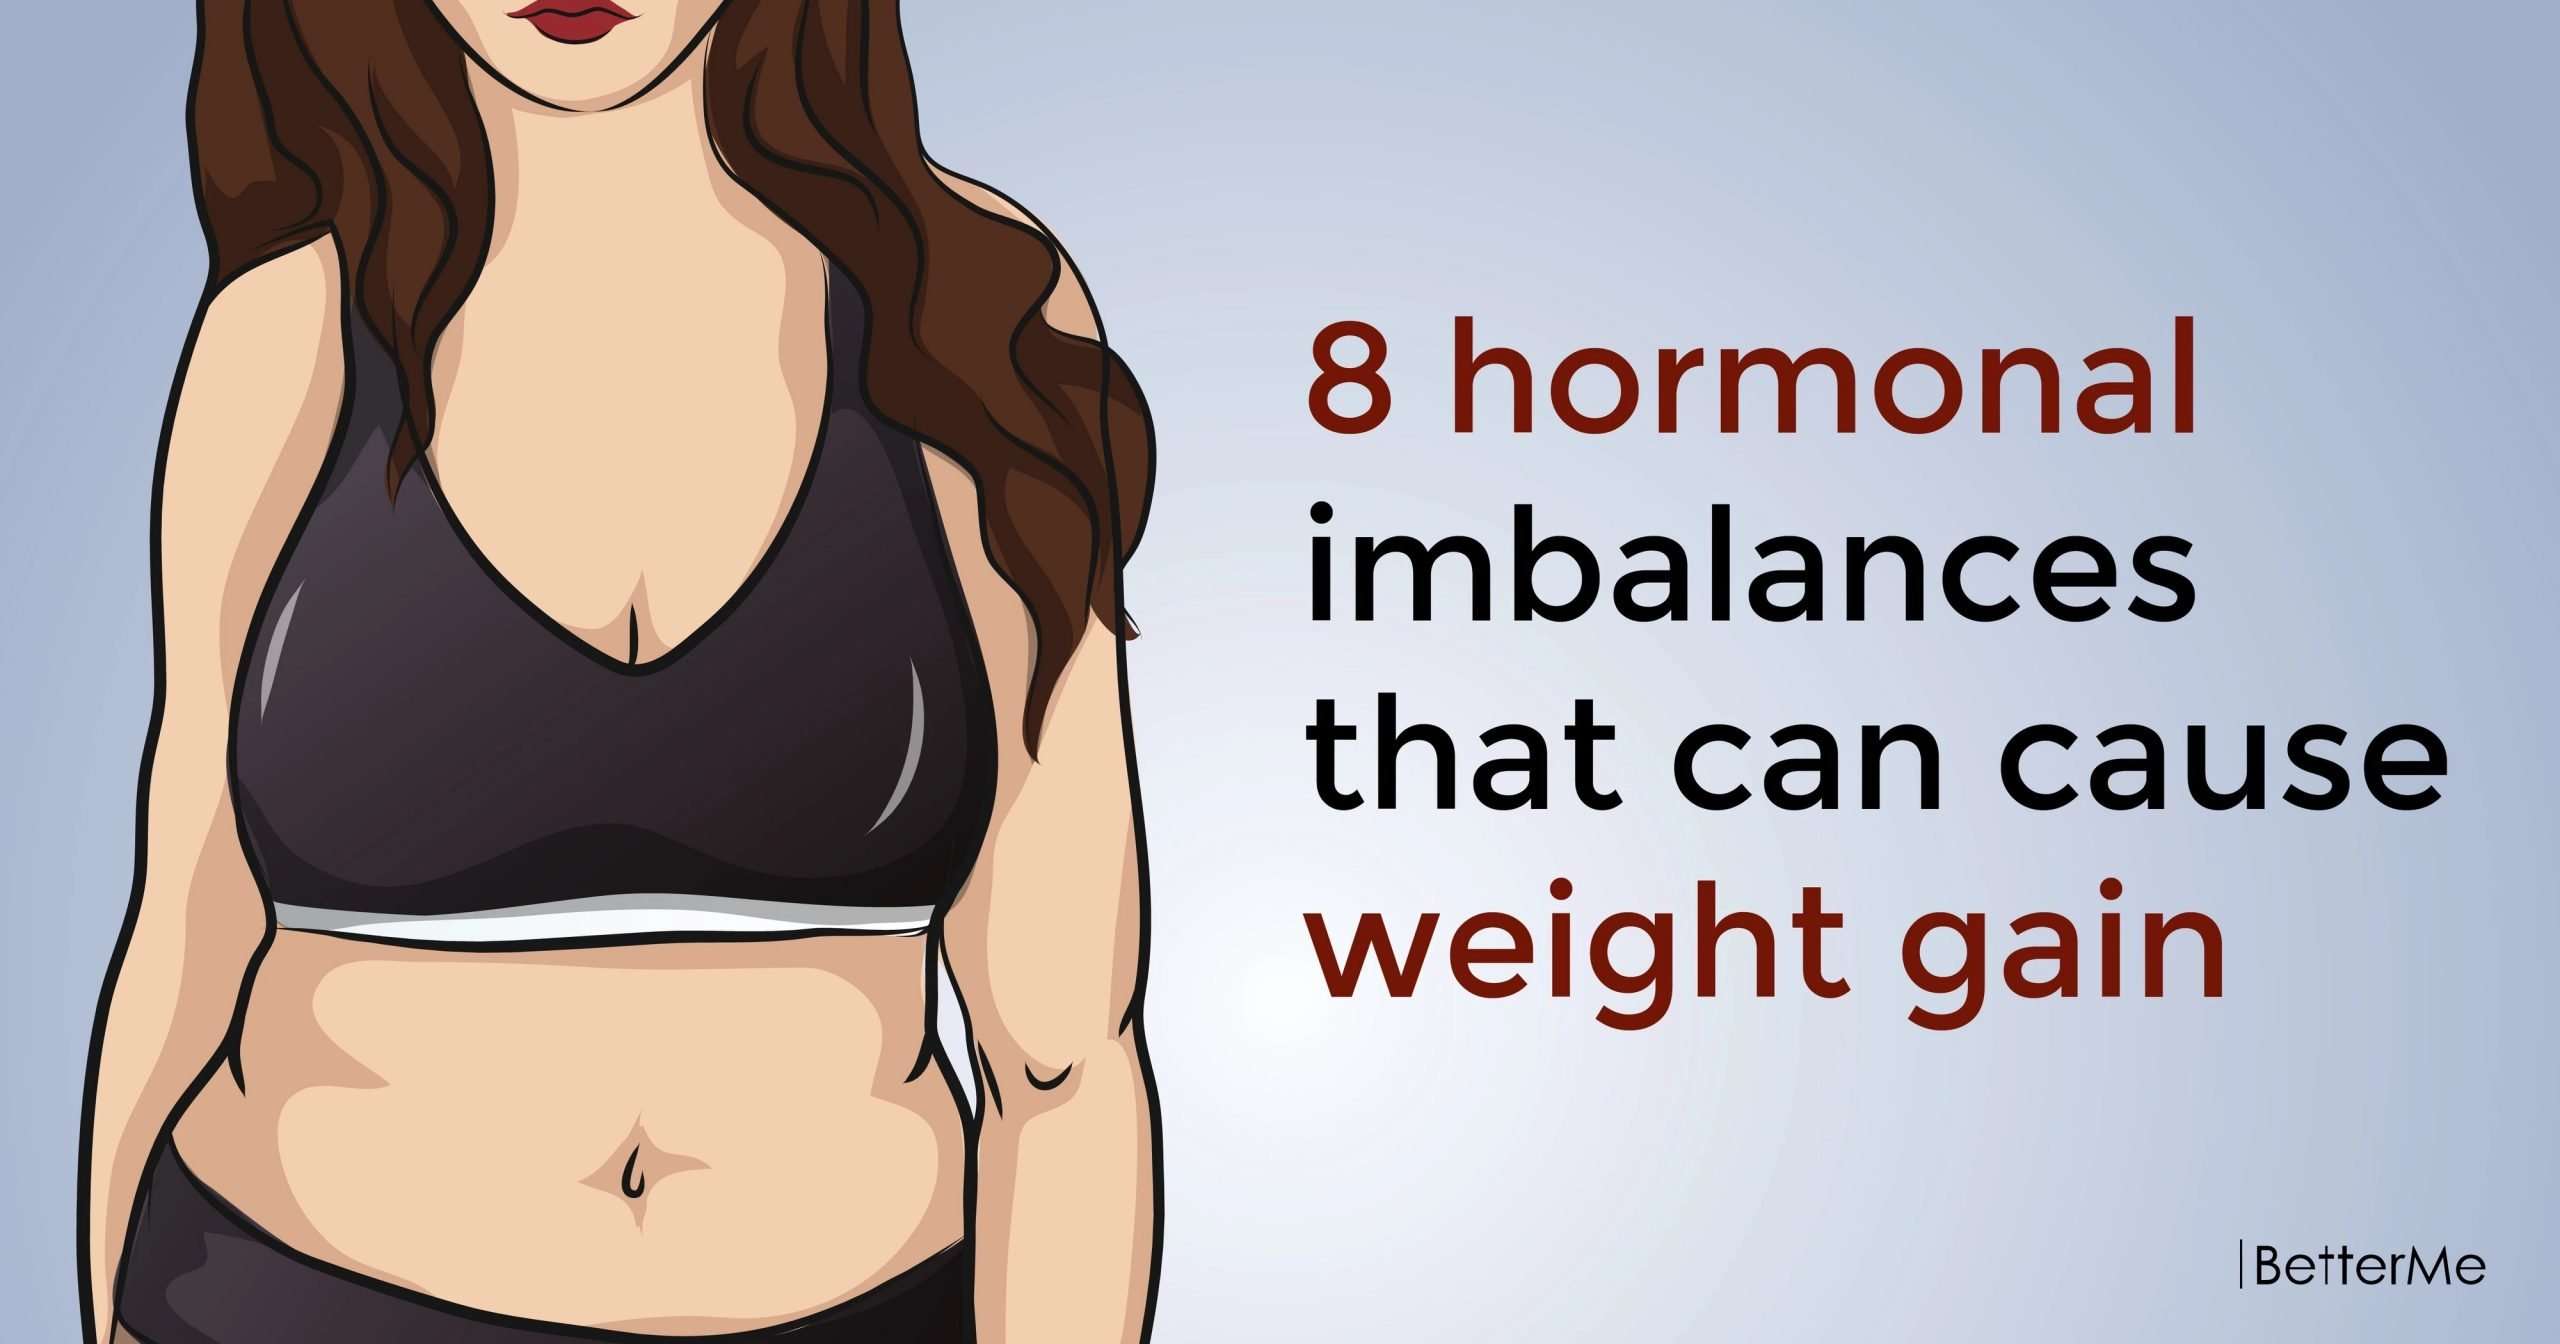 8 hormonal imbalances that can cause weight gain